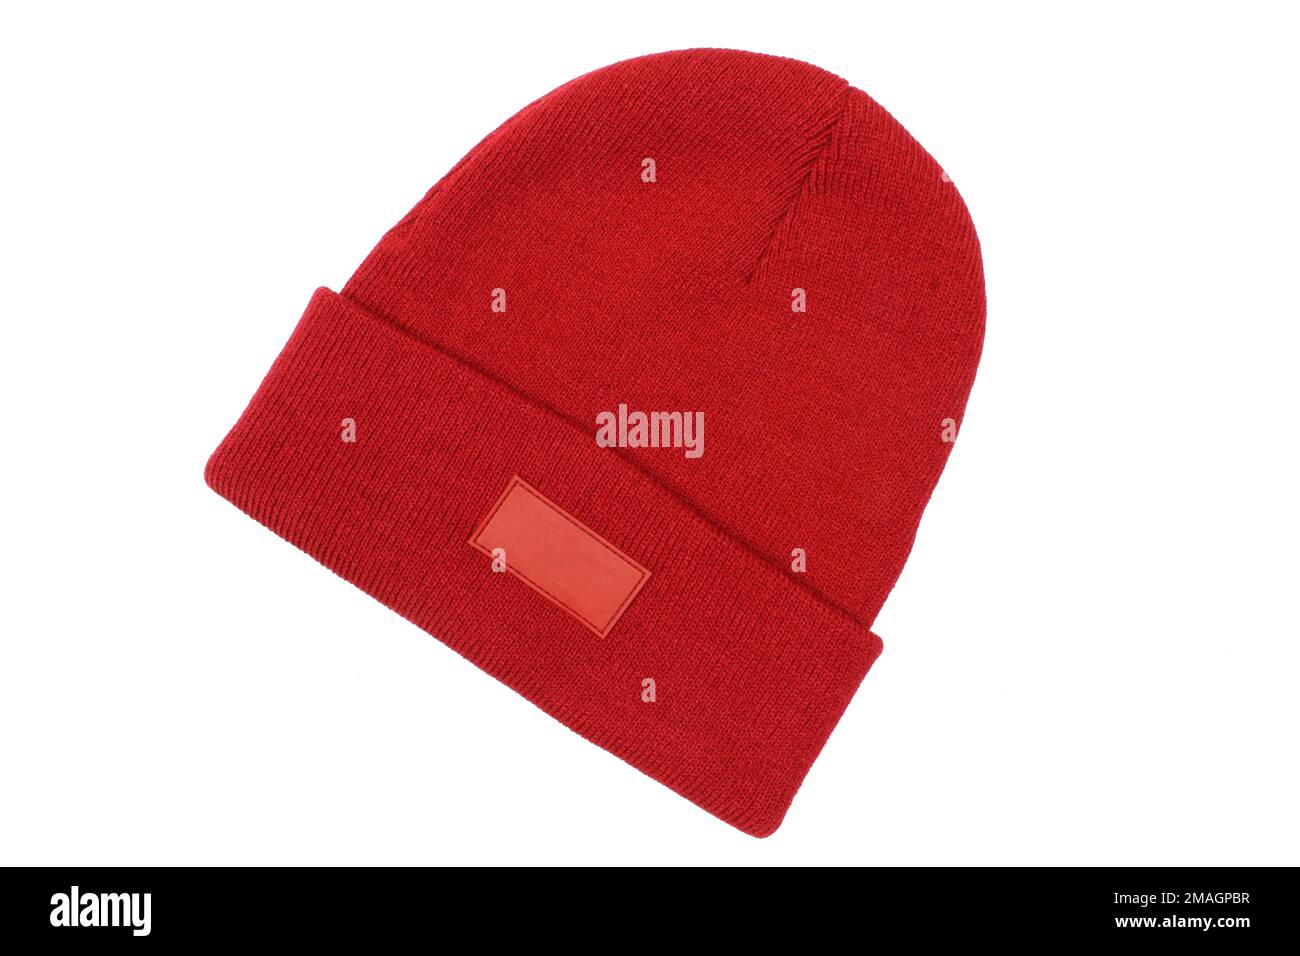 Blank red winter hat for men with blank label template isolated on white background. Classic woolen beanie cap Stock Photo